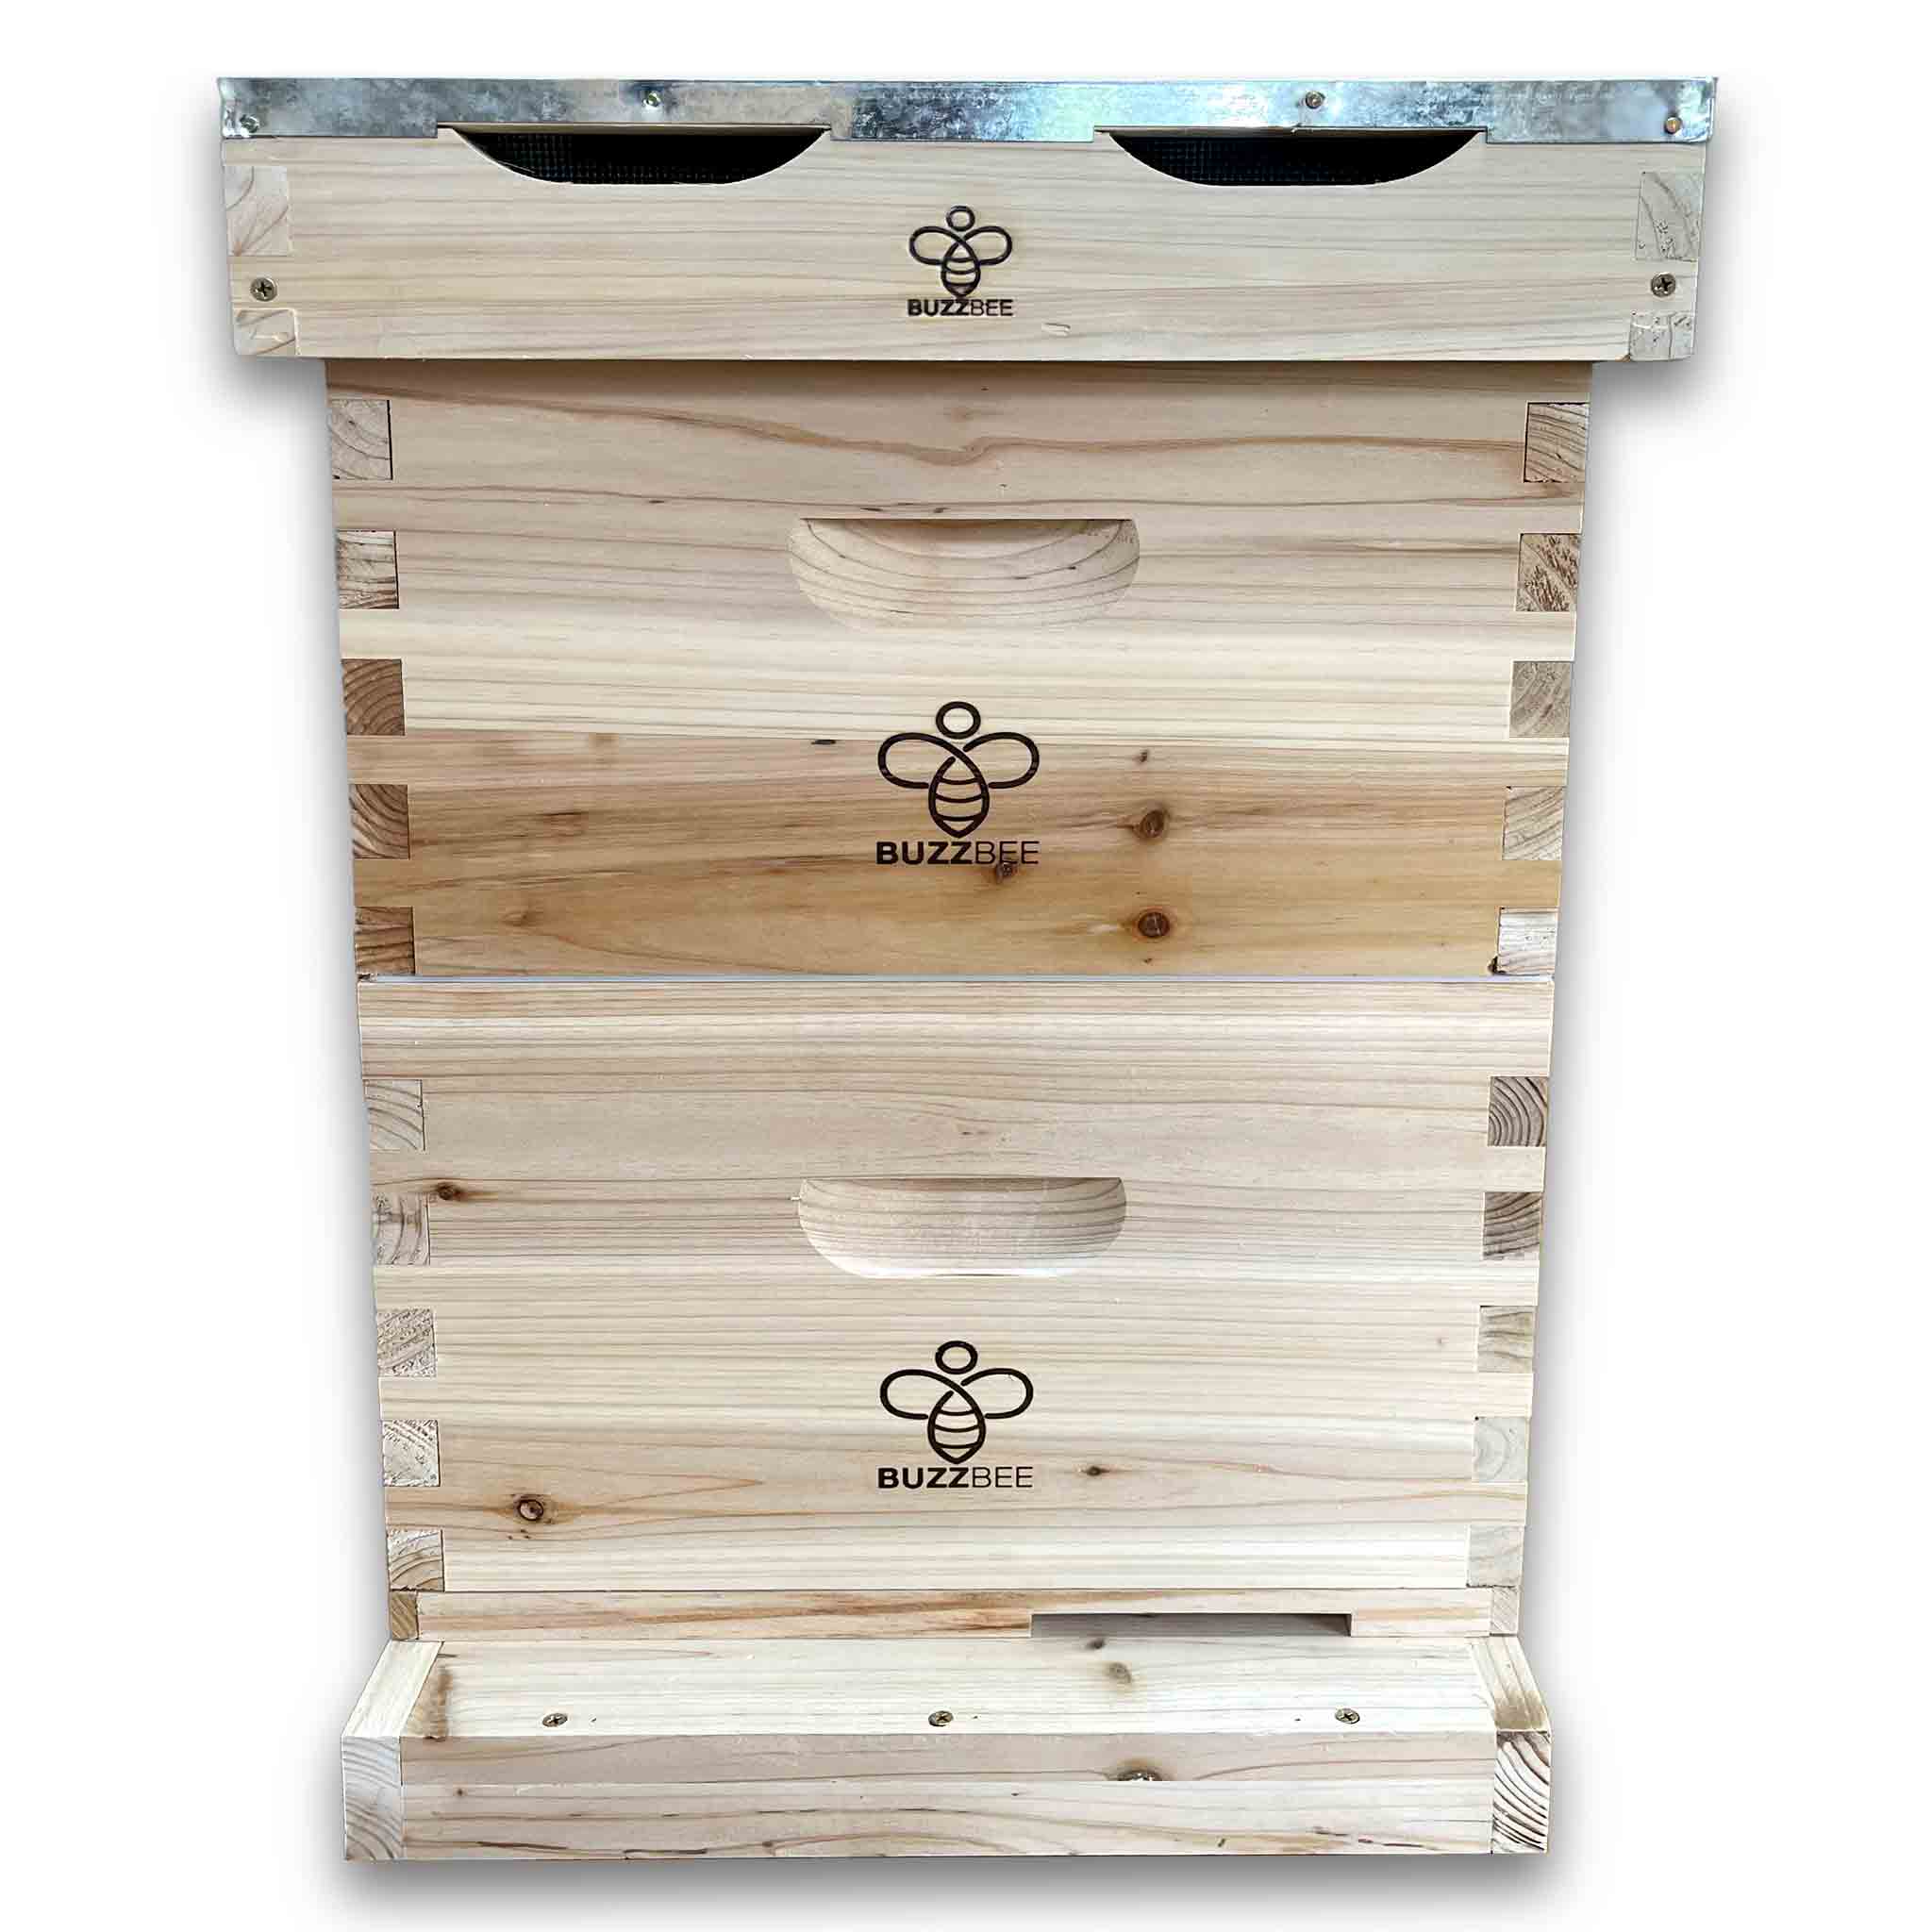 Langstroth Beehive (8 or 10 Frames) - Hives collection by Buzzbee Beekeeping Supplies